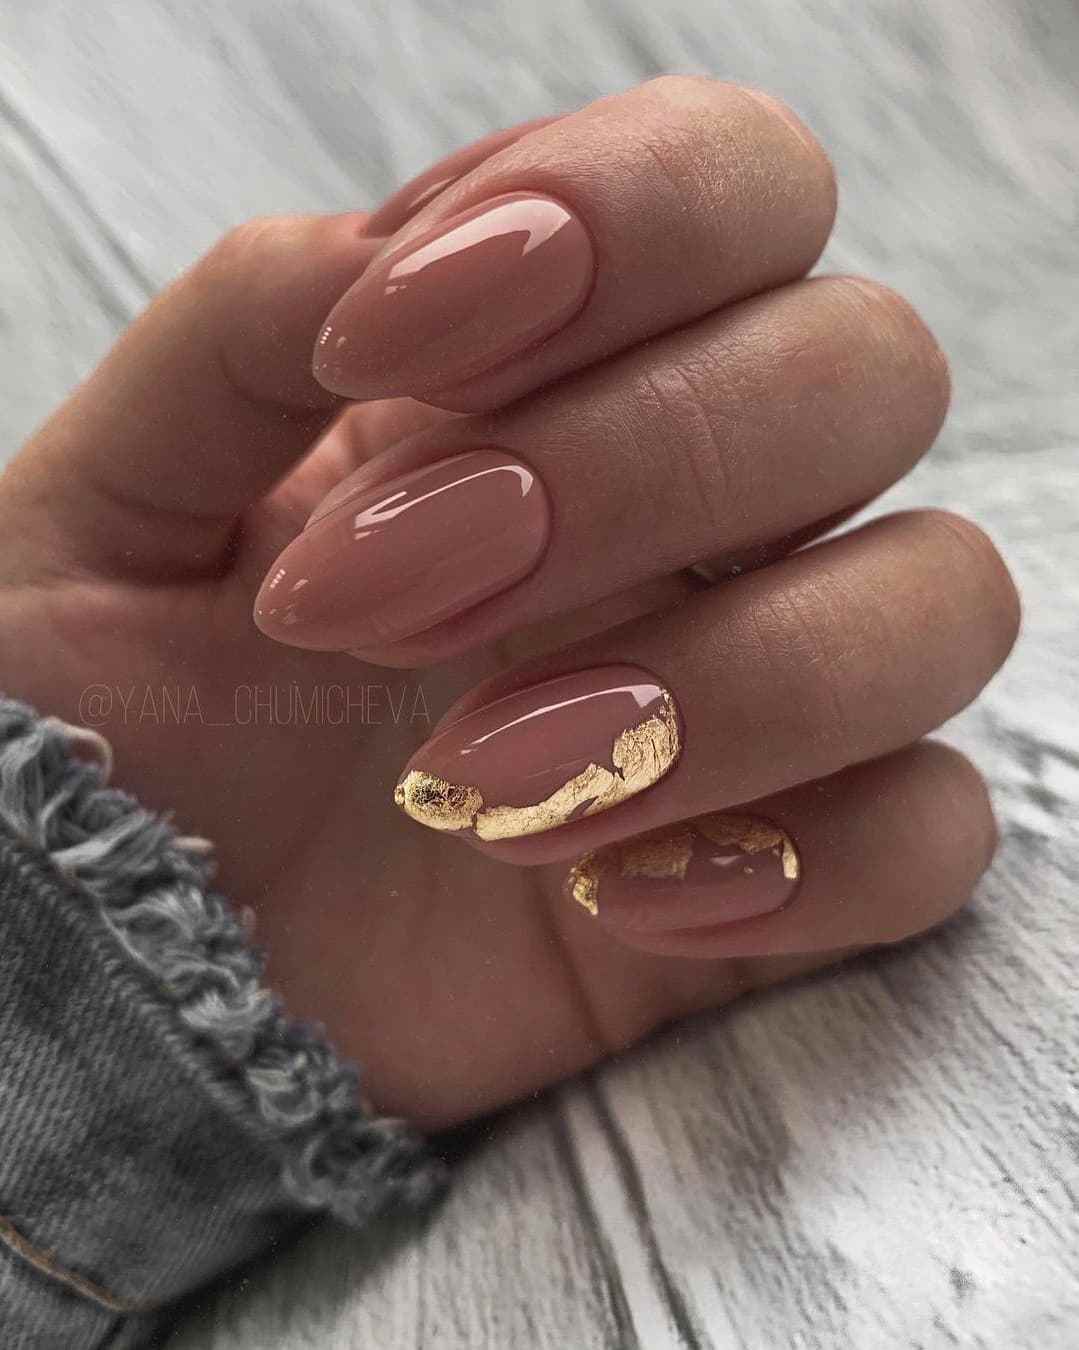 The 100+ Best Nail Designs Trends And Ideas In 2021 images 81